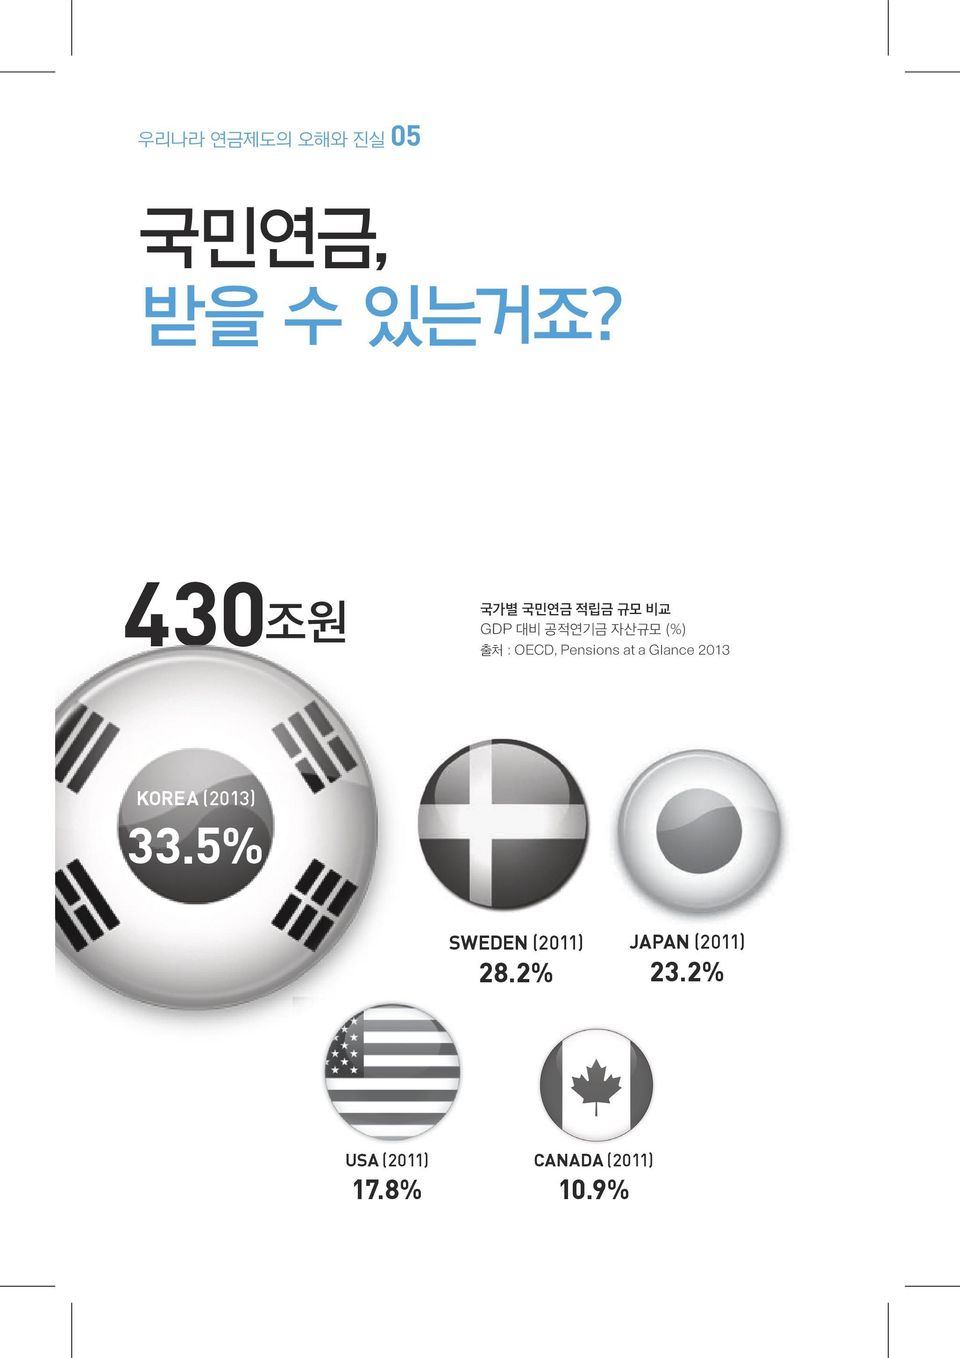 OECD, Pensions at a Glance 2013 KOREA (2013) 33.